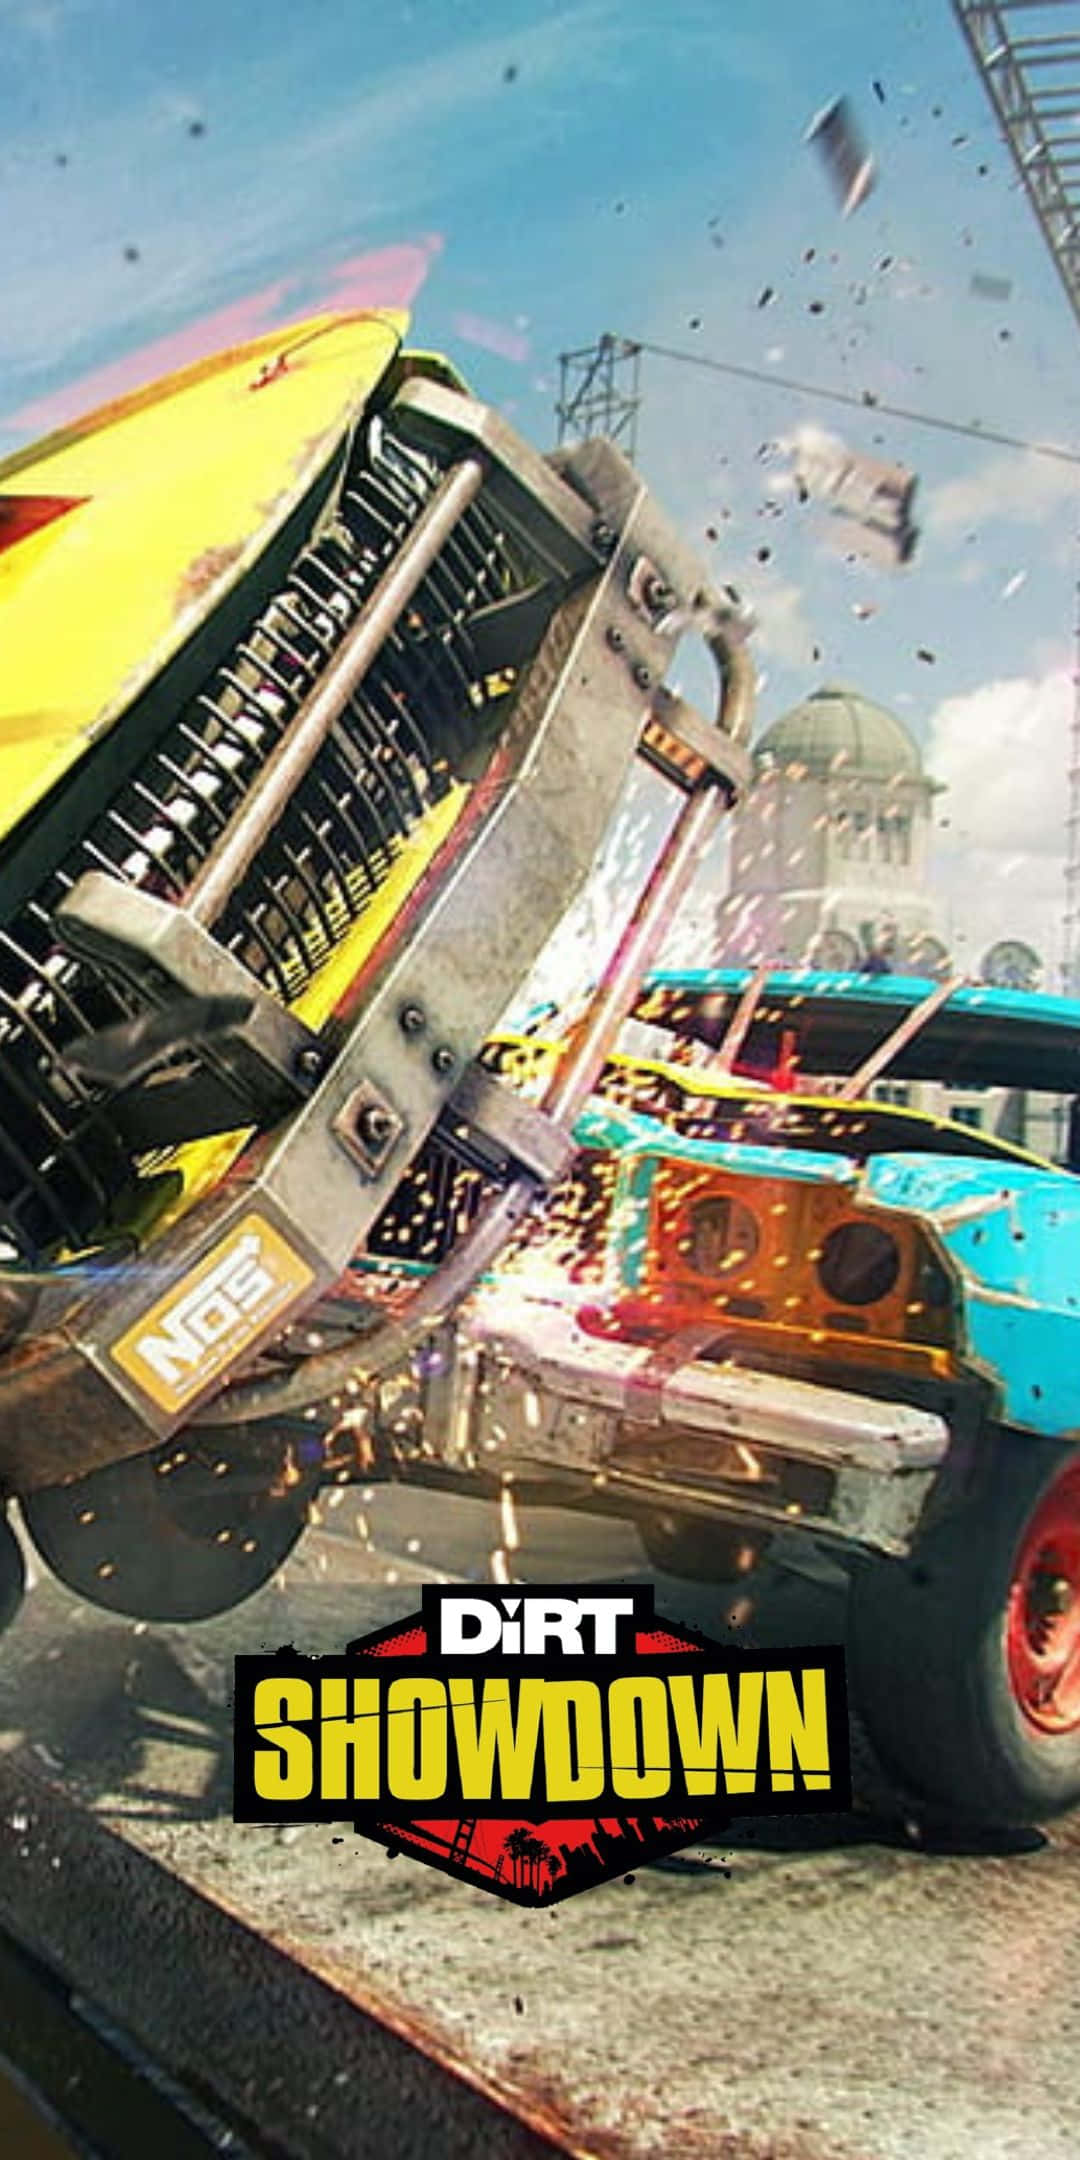 A Poster For The Game Dirt Showdown